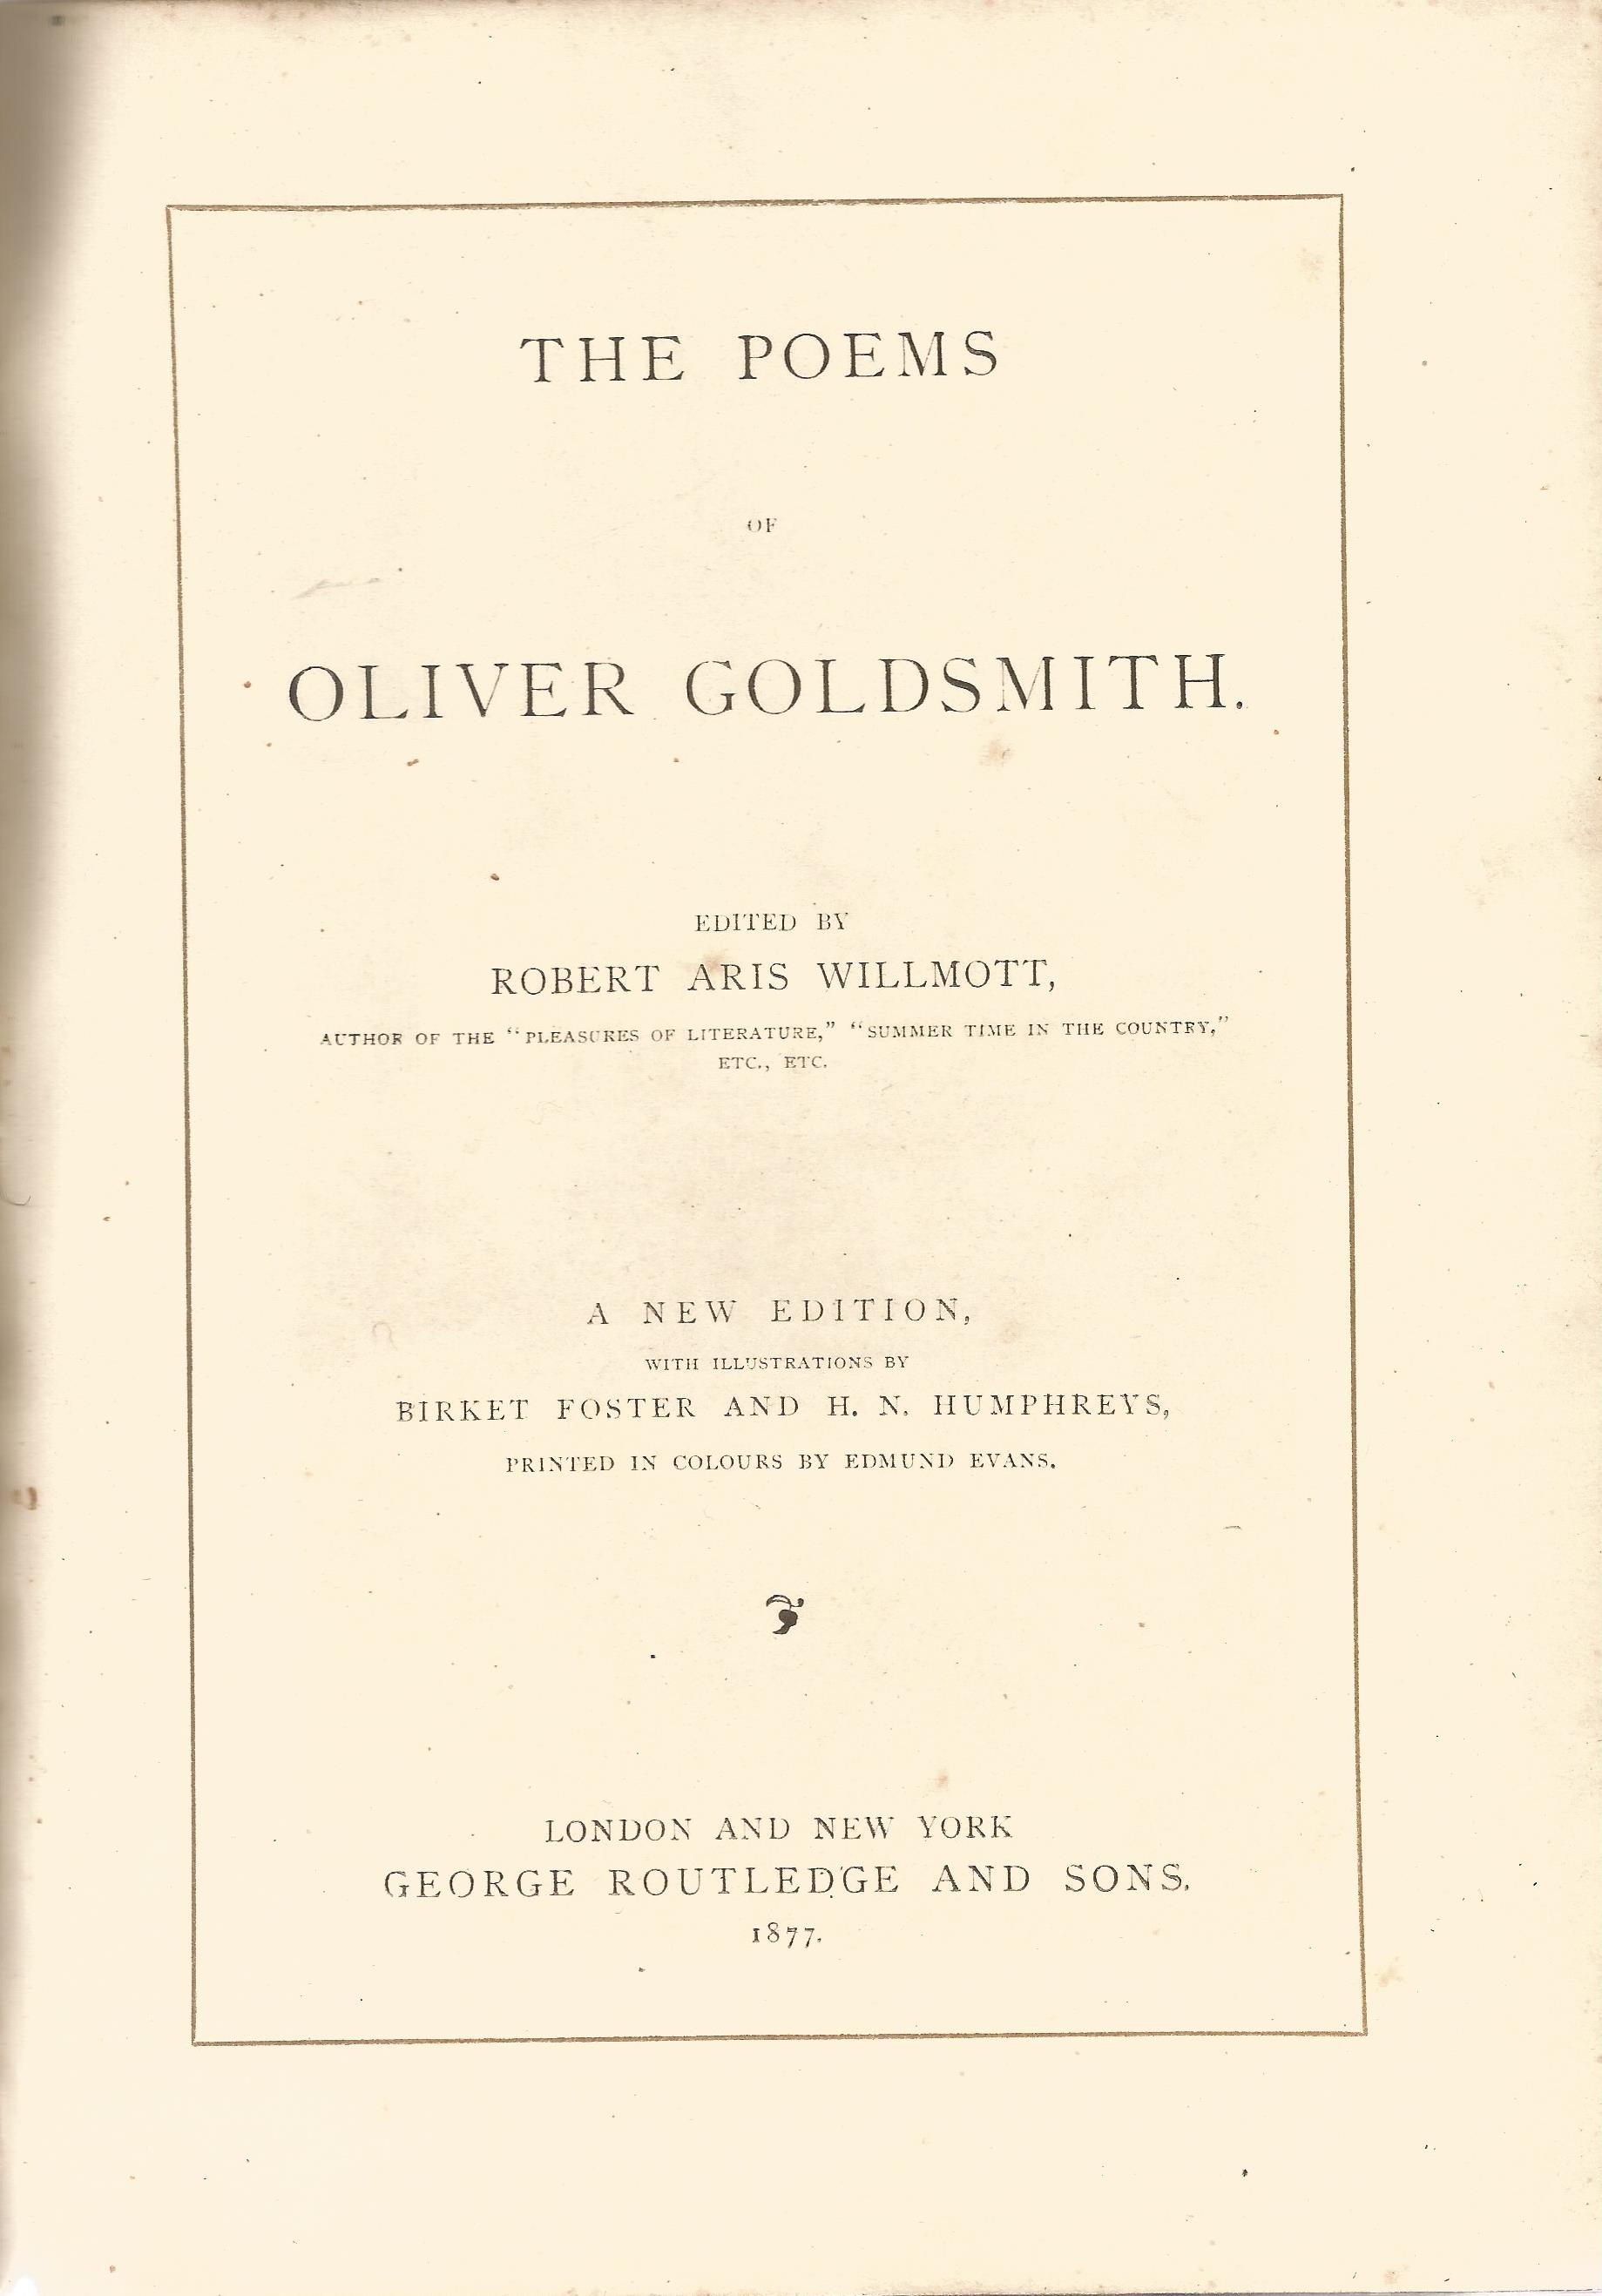 The Poems of Oliver Goldsmith edited by Robert Aris Willmott 1877 Hardback Book A New Edition - Image 2 of 2